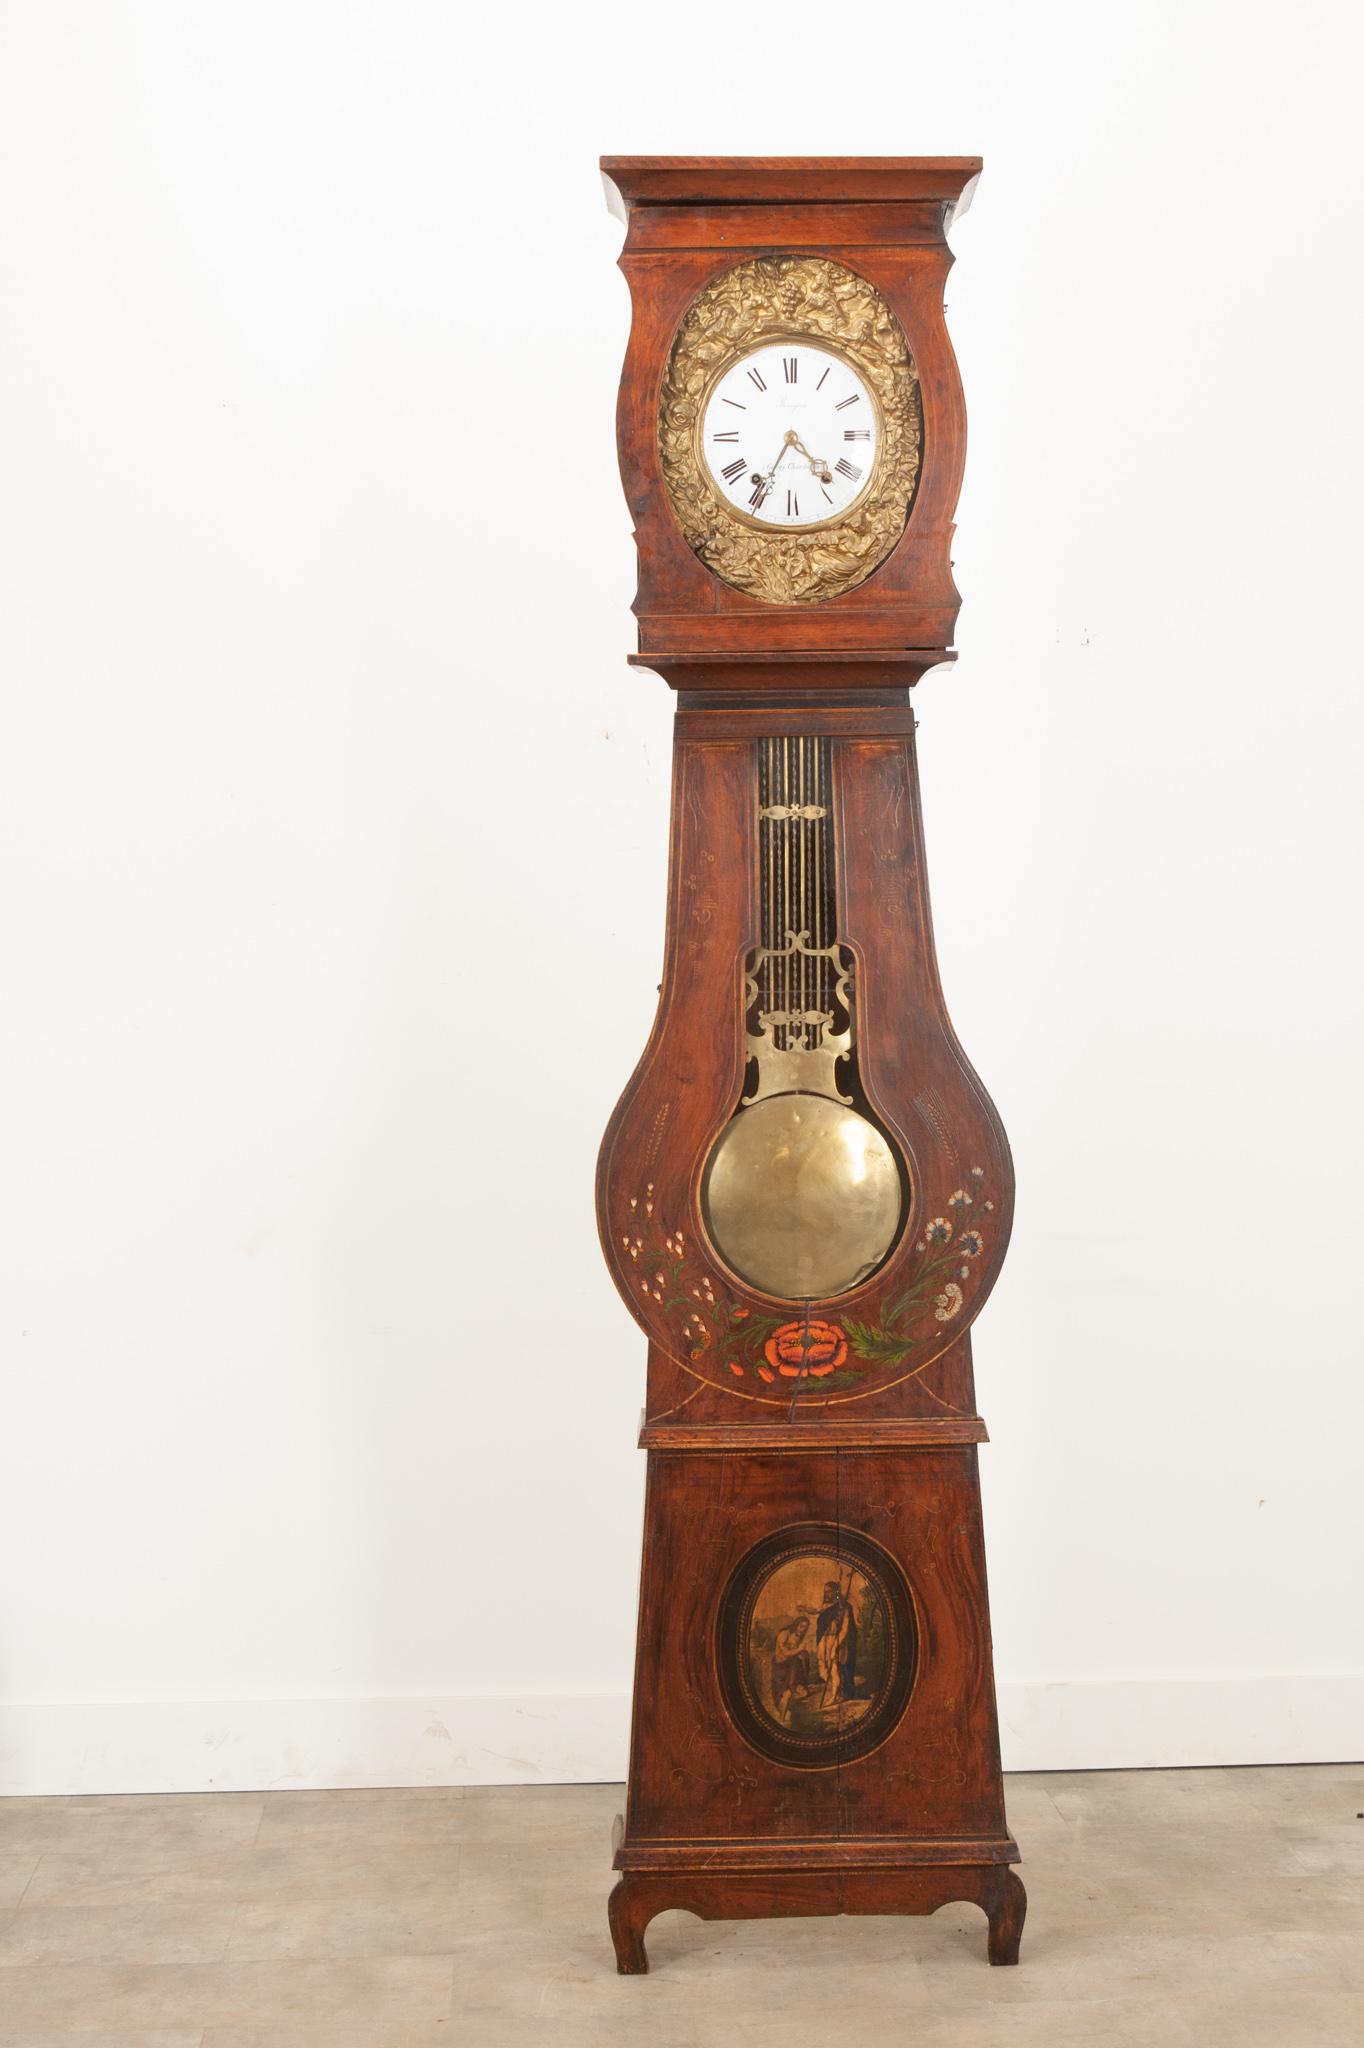 This French 19th Century banjo shaped case clock is an eye-catching piece in any space. Topped by a smartly carved cornice above the dial face door. Supported by an intricate brass repousse frontage, the dial face sports hand painted Roman numerals.